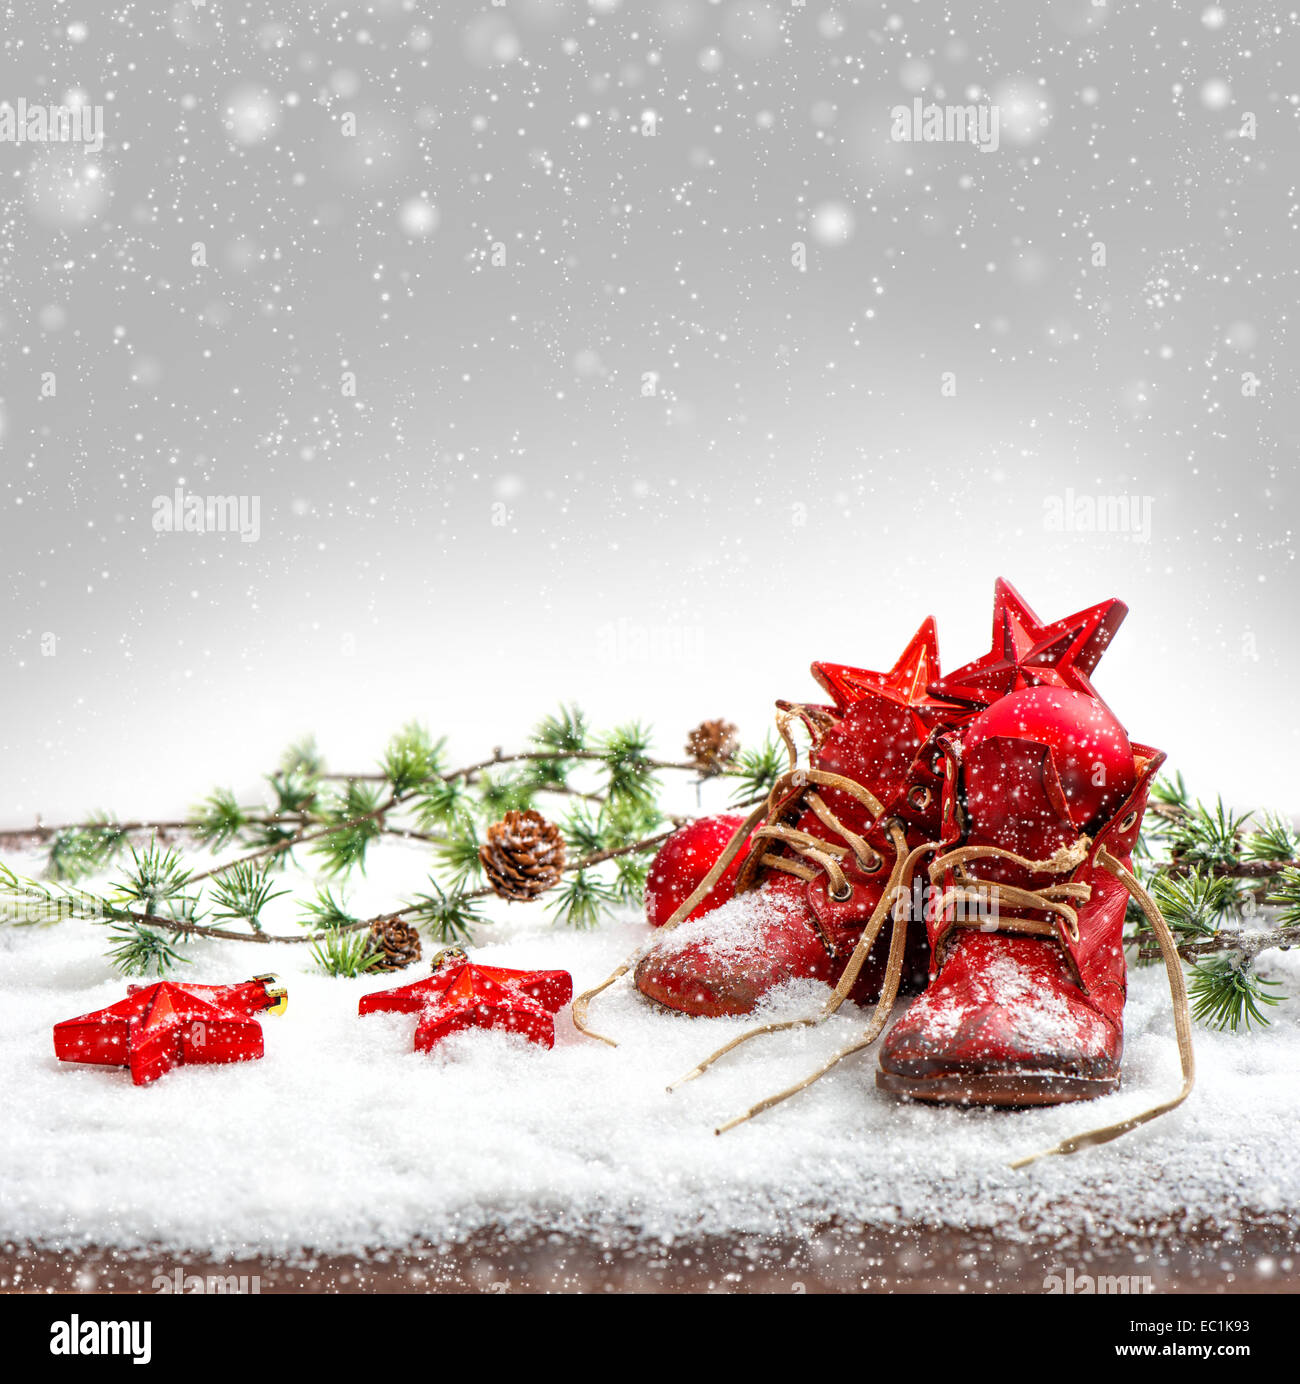 nostalgic christmas decoration with antique baby shoes. retro style picture with falling snow effect Stock Photo